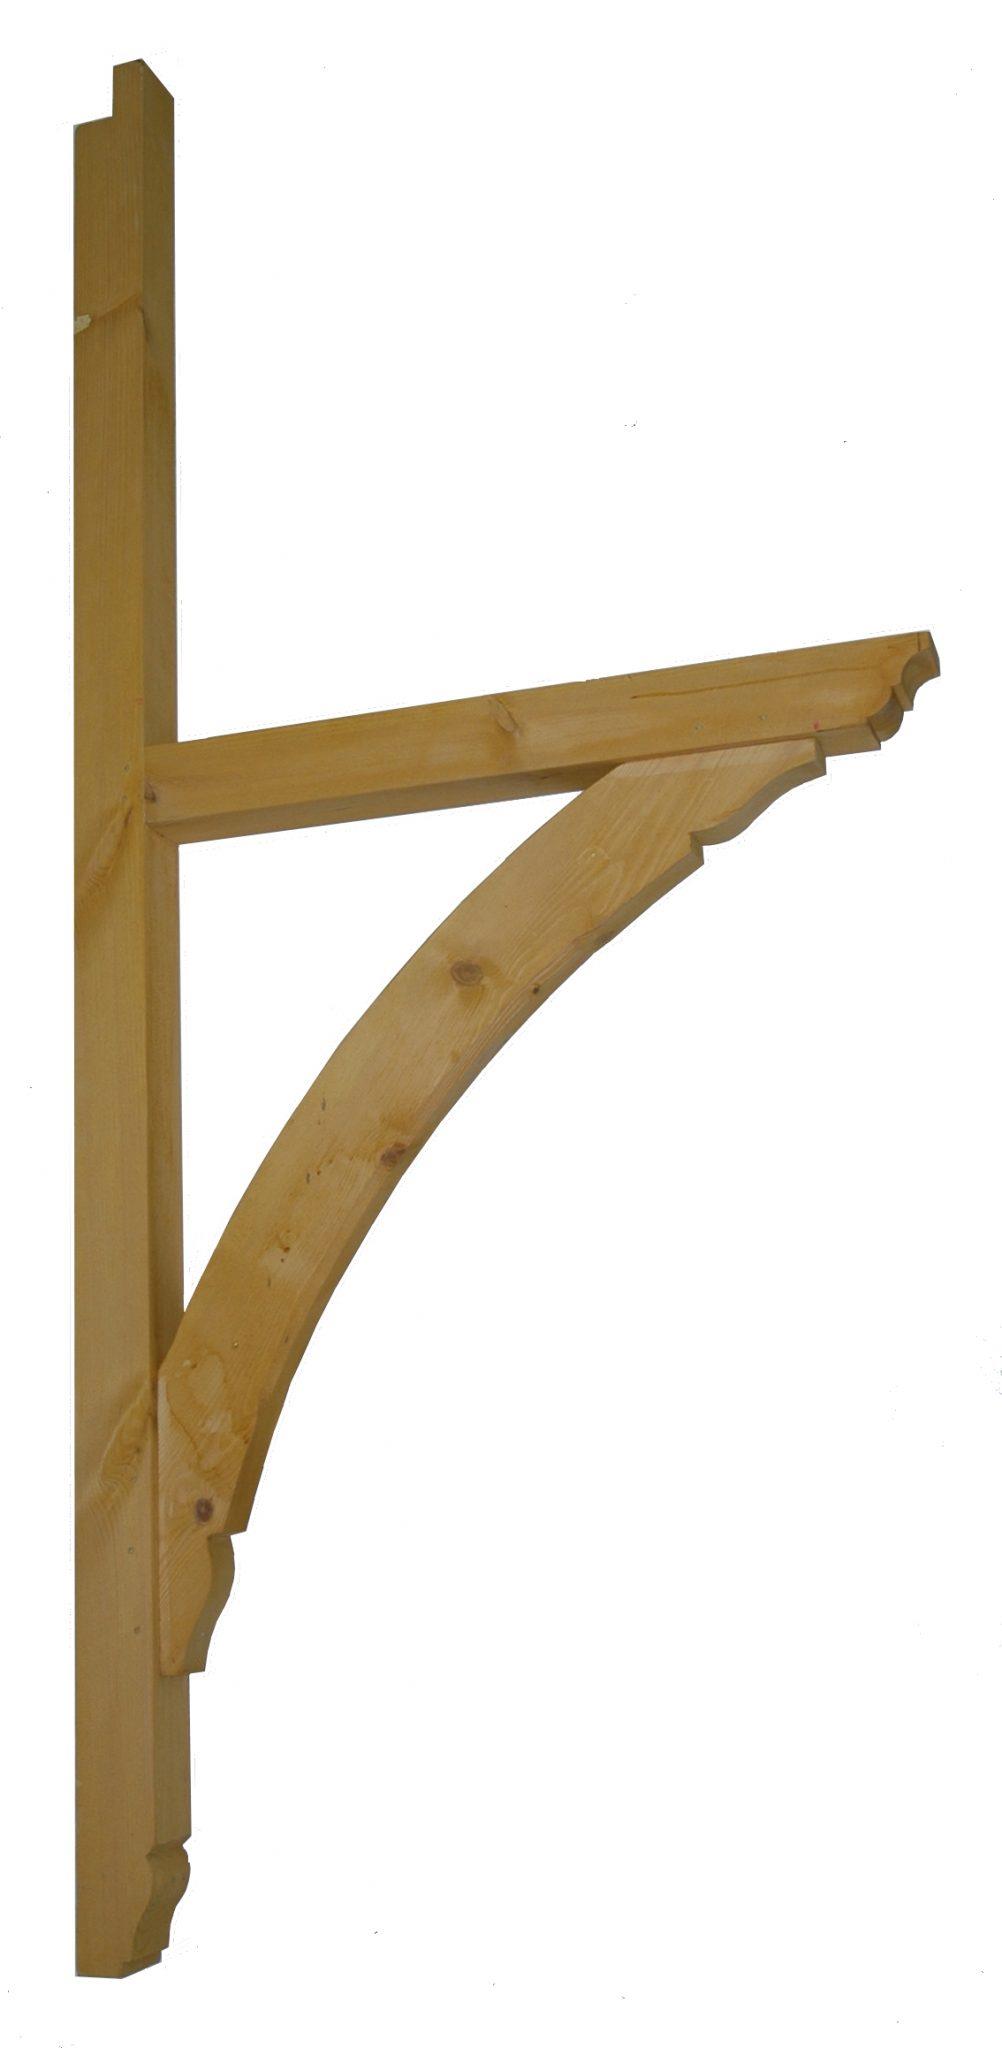 F-MSL-45-S Timber mono pitch porch Gallows Bracket 700 projection